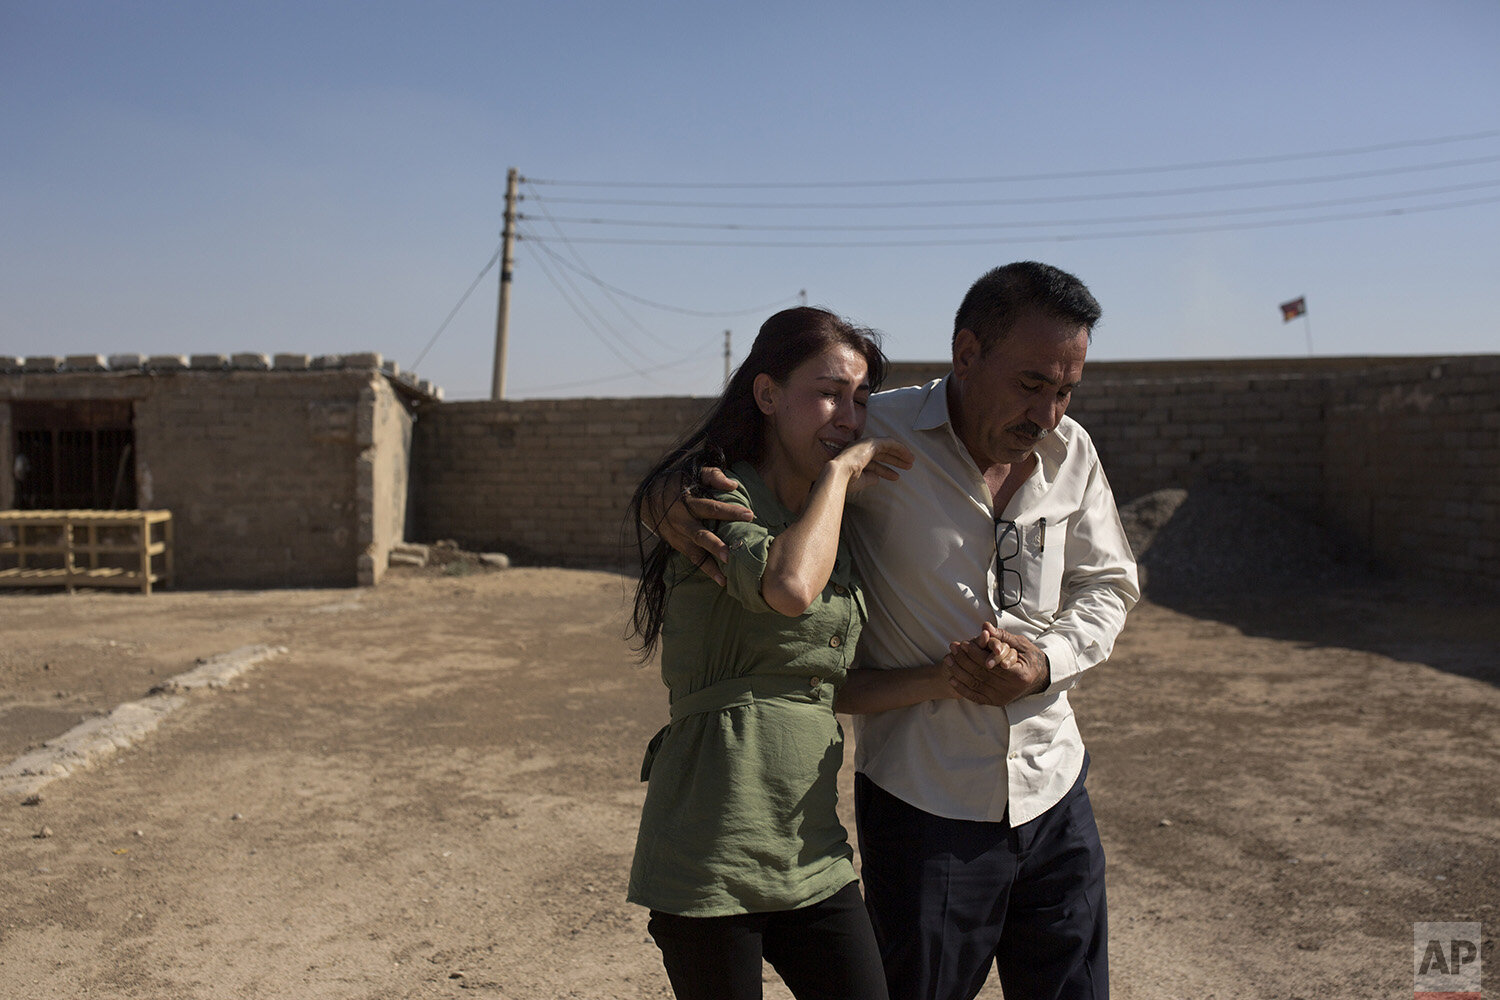  In this Aug. 31, 2019 photo, Layla Taloo is overcome with grief as her brother, Khalid, leads her away from the compound where she last saw her husband in 2014 after the family was captured by Islamic State militants in Tal Afar, Iraq. Her family wa